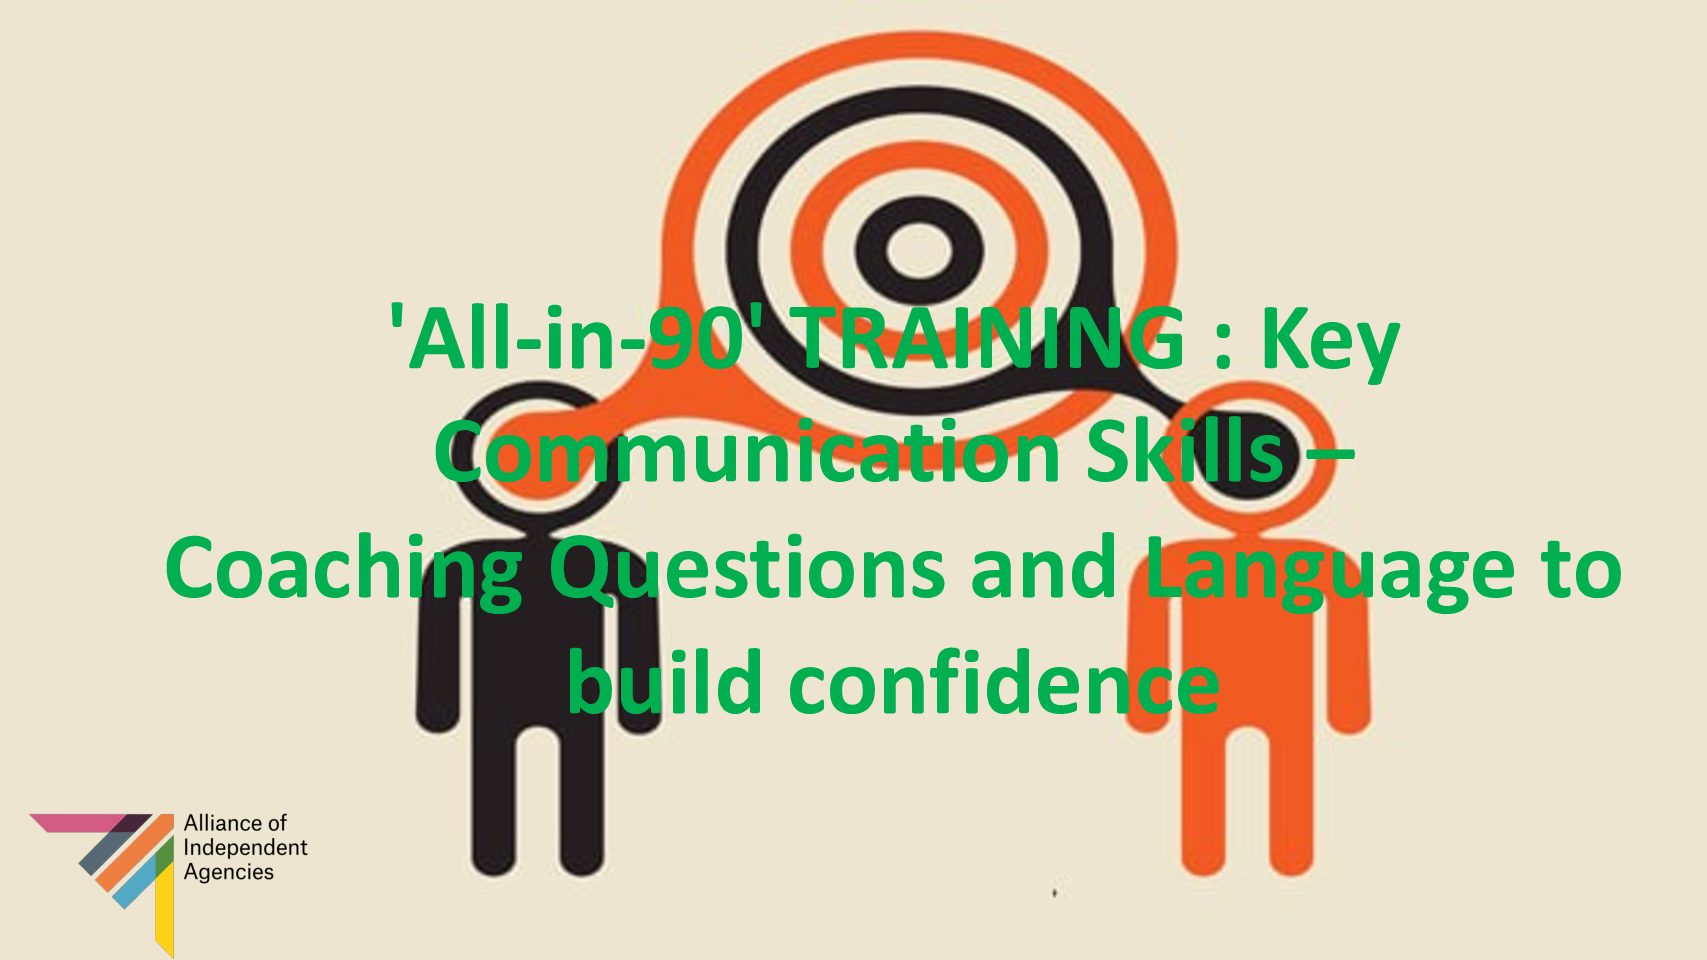 'All-in-90' TRAINING : Key Communications Skills - Coaching Questions and Language to Build Confidence